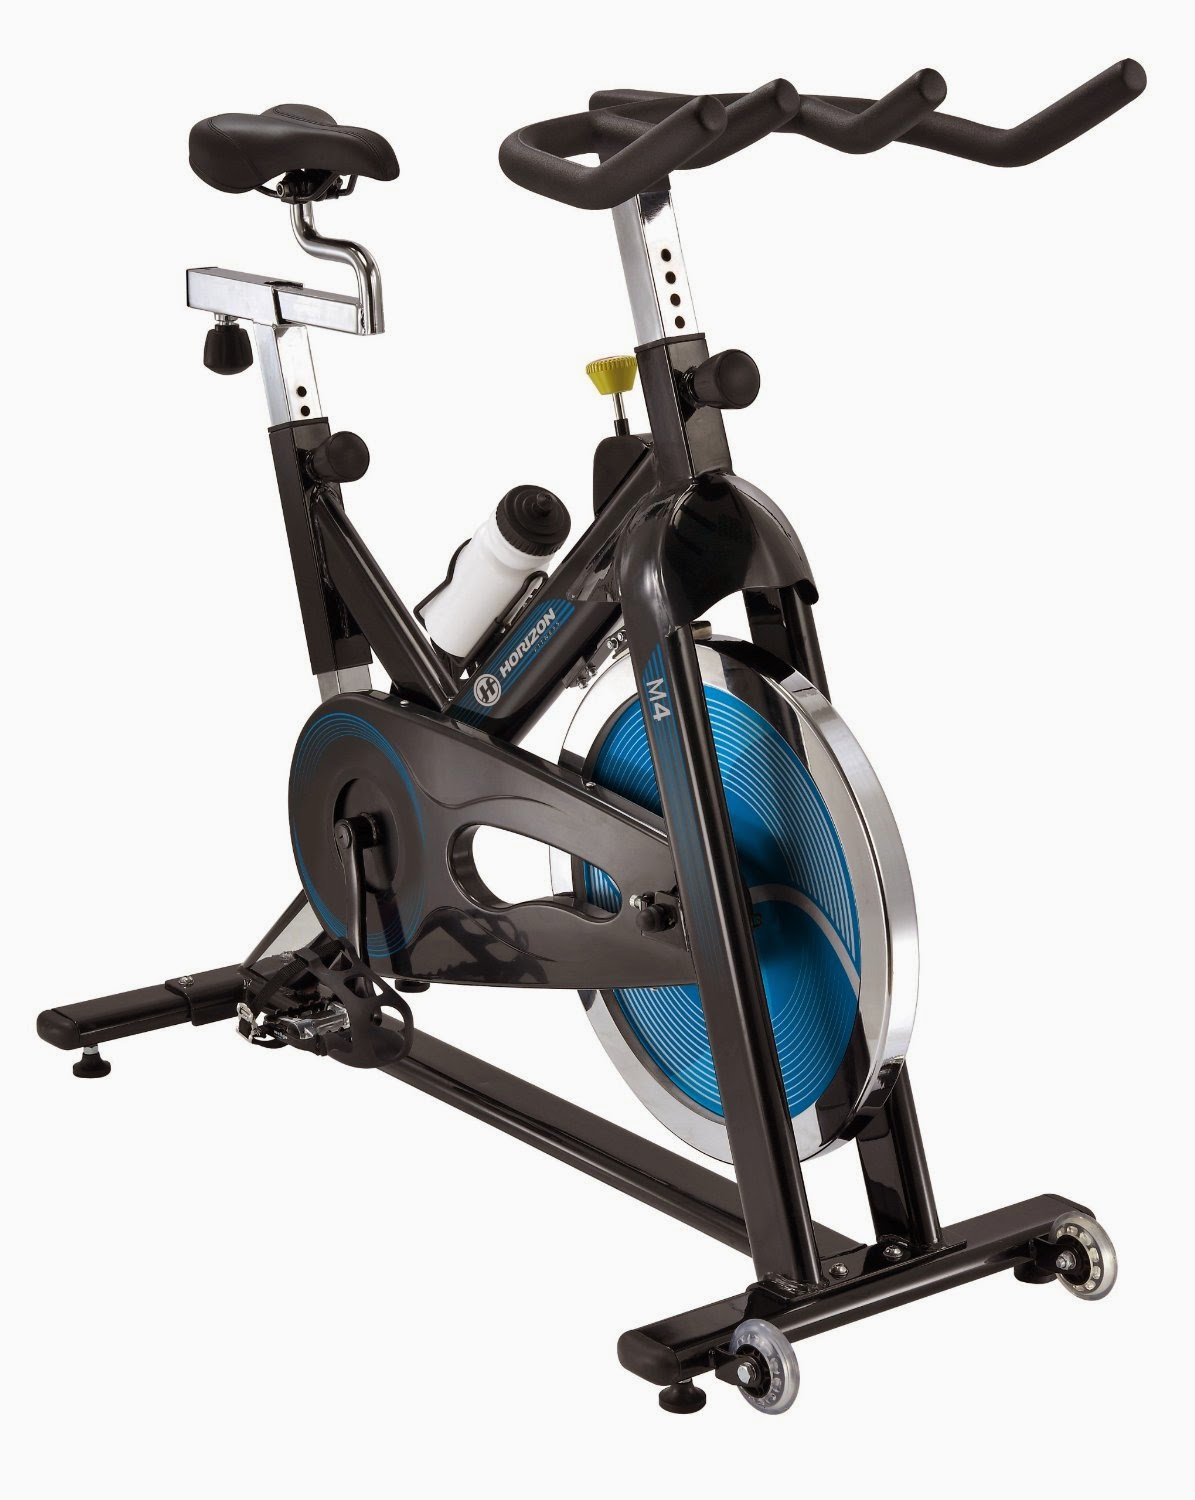 Horizon Fitness M4 Indoor Cycle, review of features, spin bike, mimics the feel of an outdoor road bike